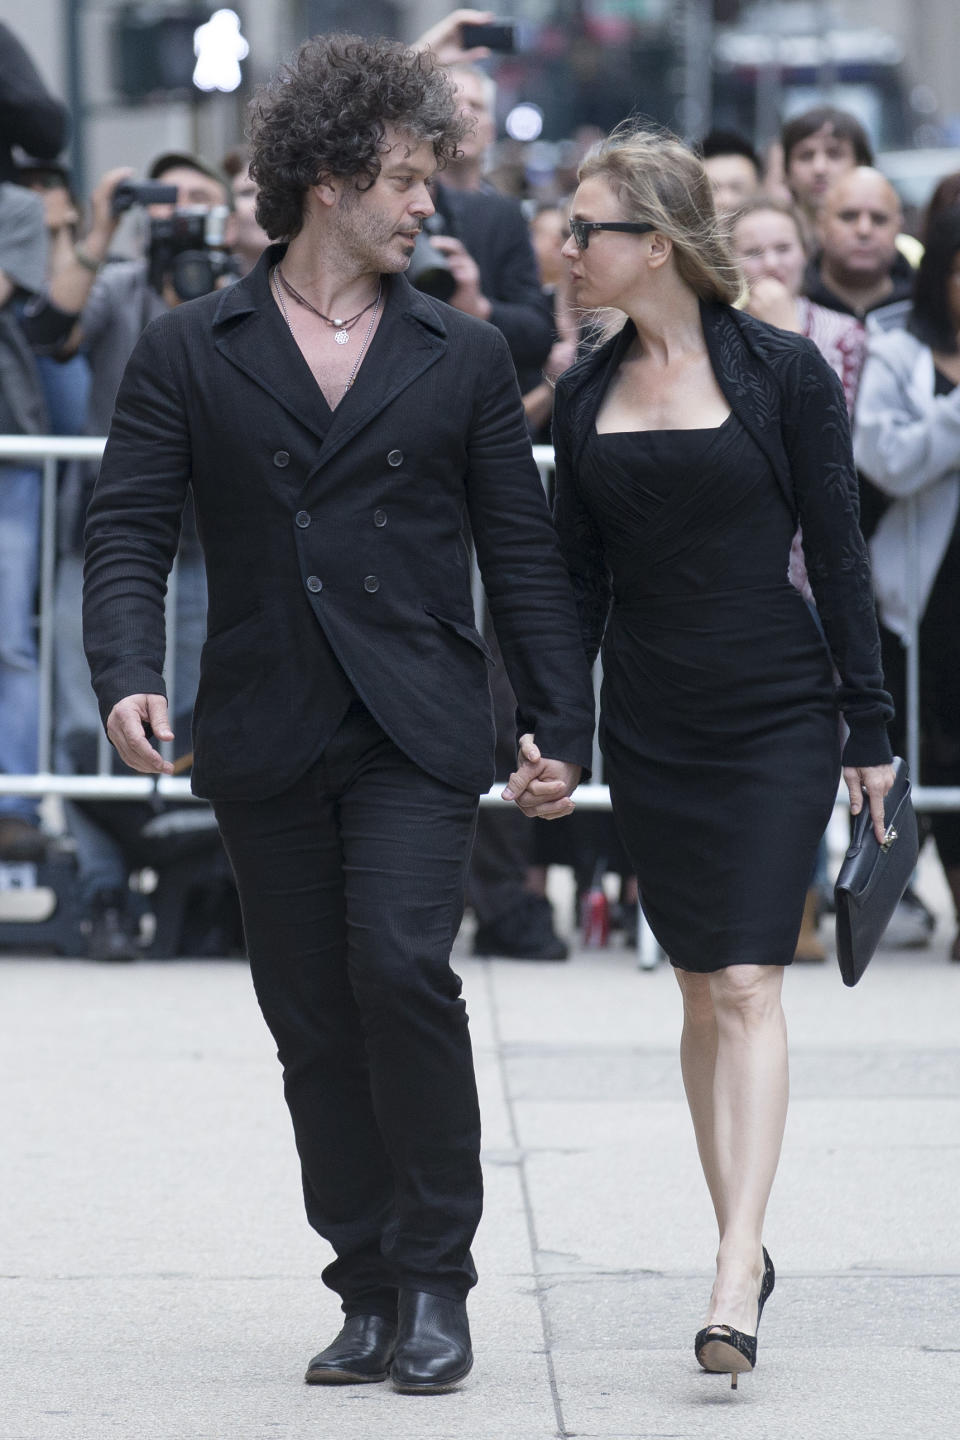 Renee Zellweger, right, and Doyle Bramhall arrive at St. Bartholomew's Church for a memorial service for fashion designer L'Wren Scott, Friday, May 2, 2014, in New York. Scott committed suicide on March 17 in her Manhattan apartment. (AP Photo/John Minchillo)